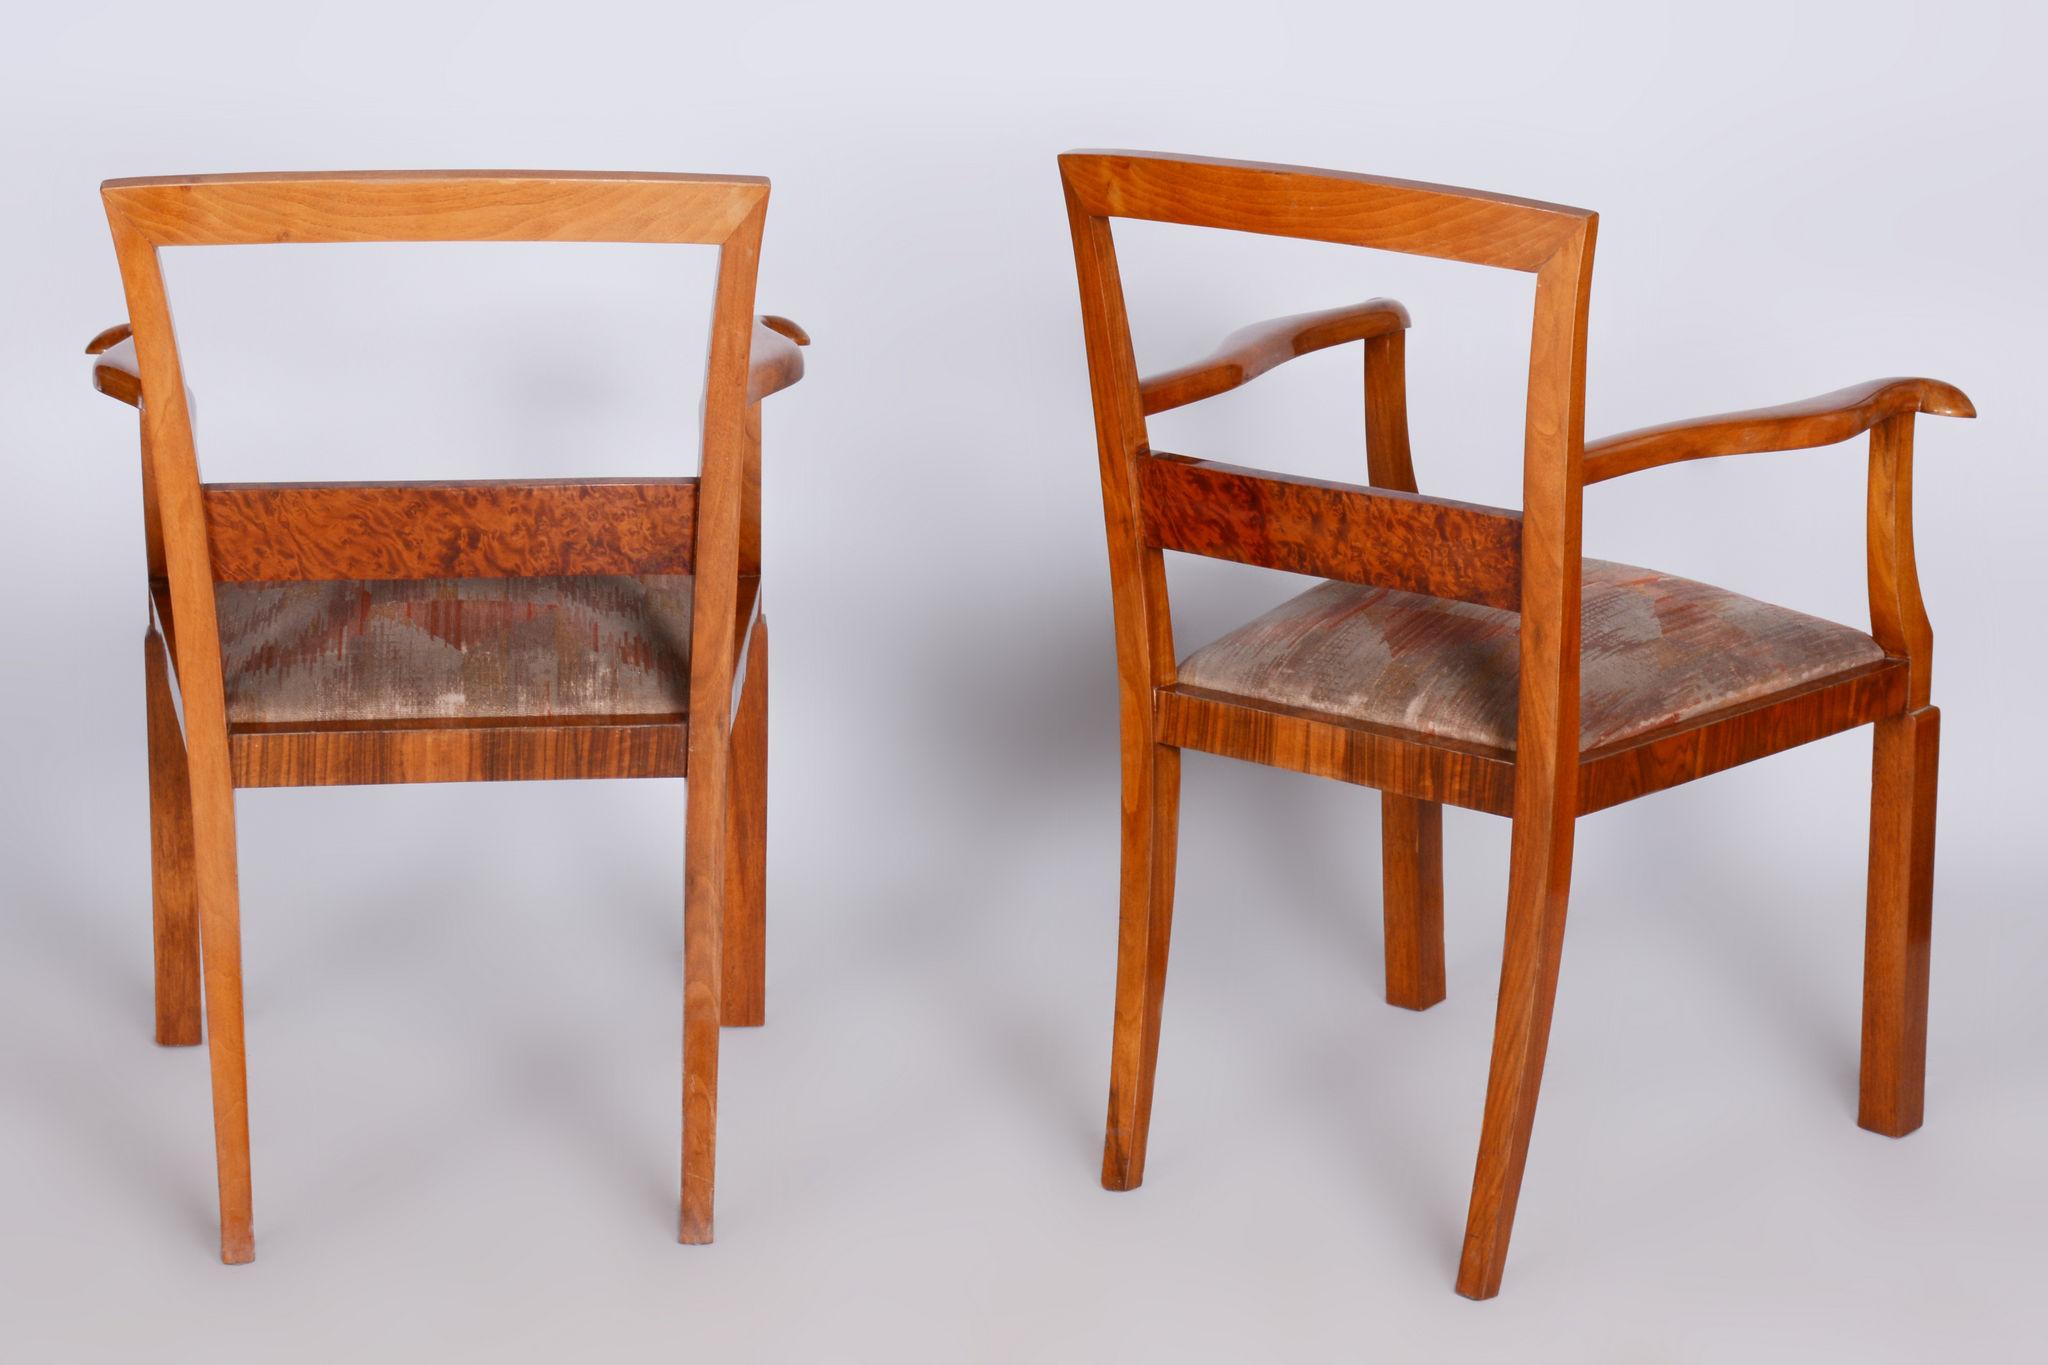 20th Century Pair of Brown ArtDeco Beech Armchairs, 1920s, Original Upholstery For Sale